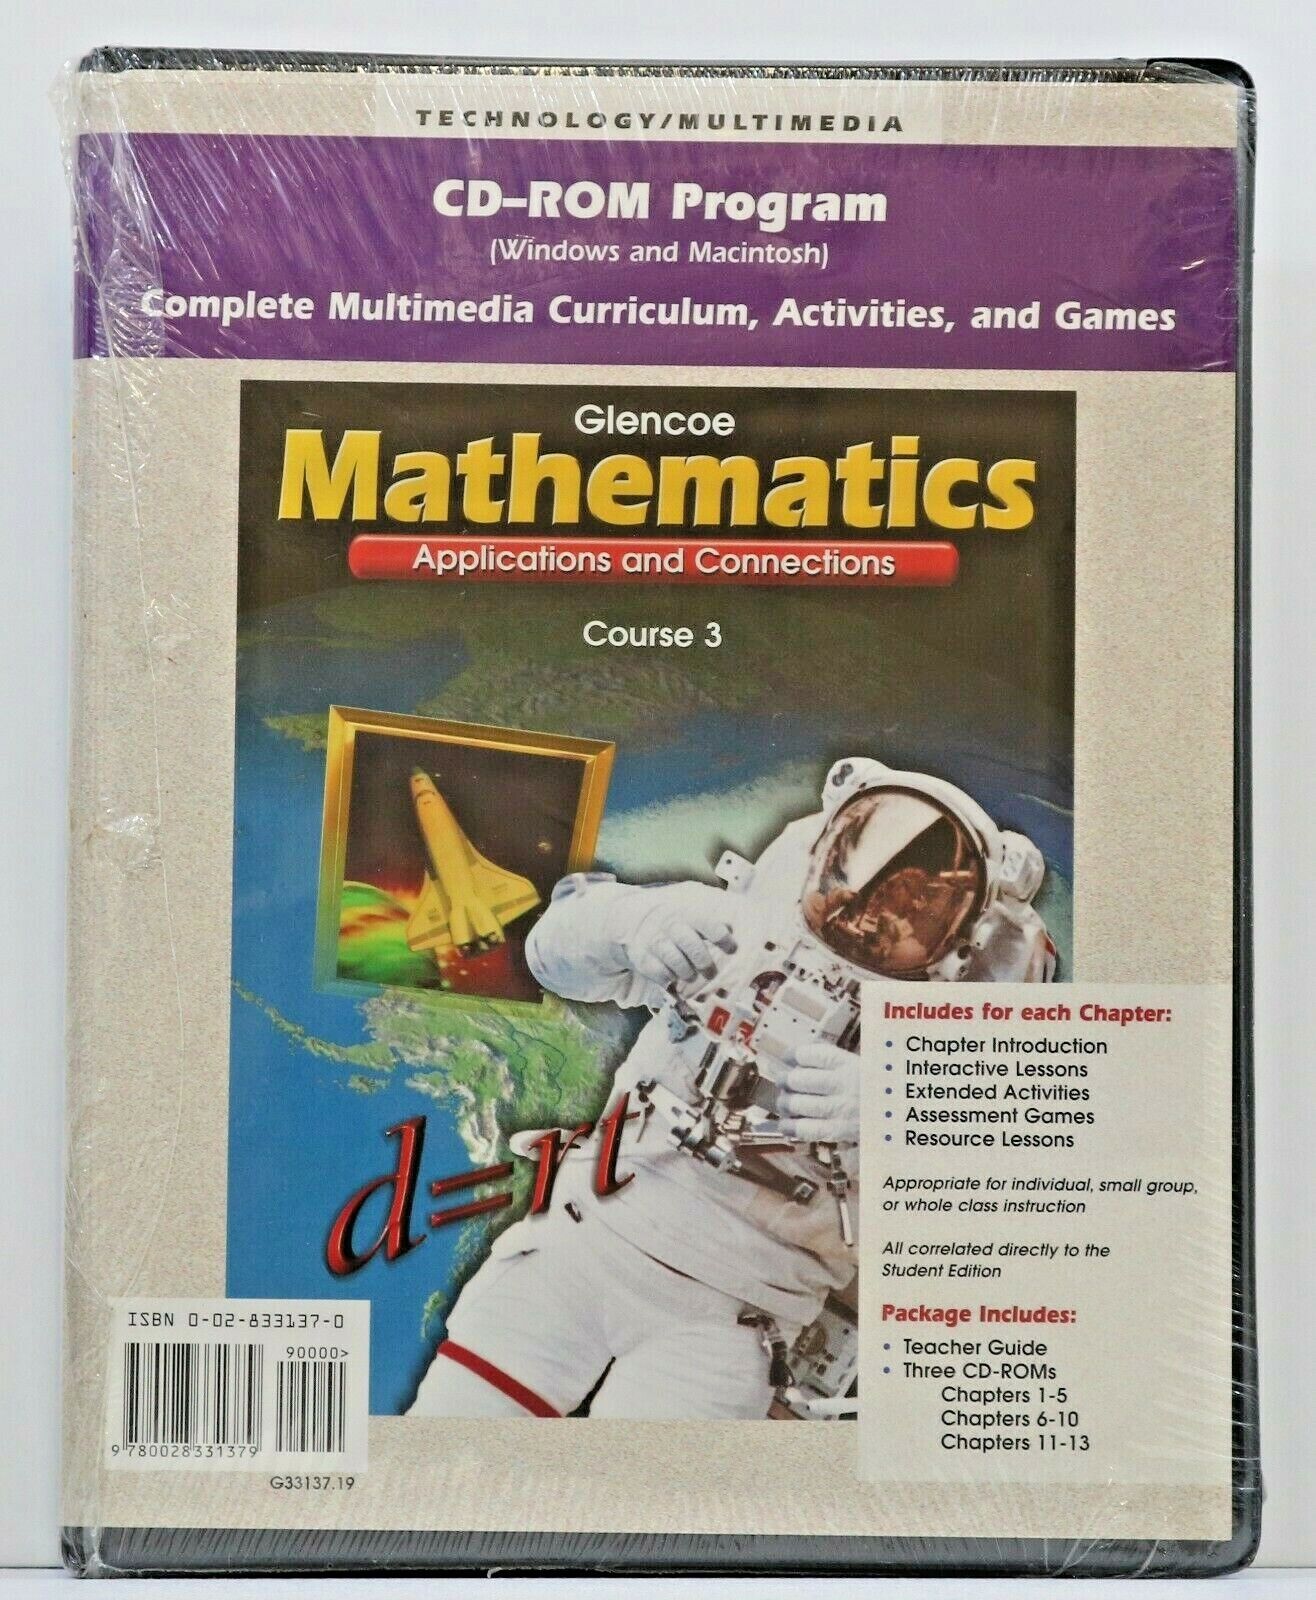 Glencoe Mathematics Applications & Connections Course 3 CD-ROM Curriculum Win/Ma